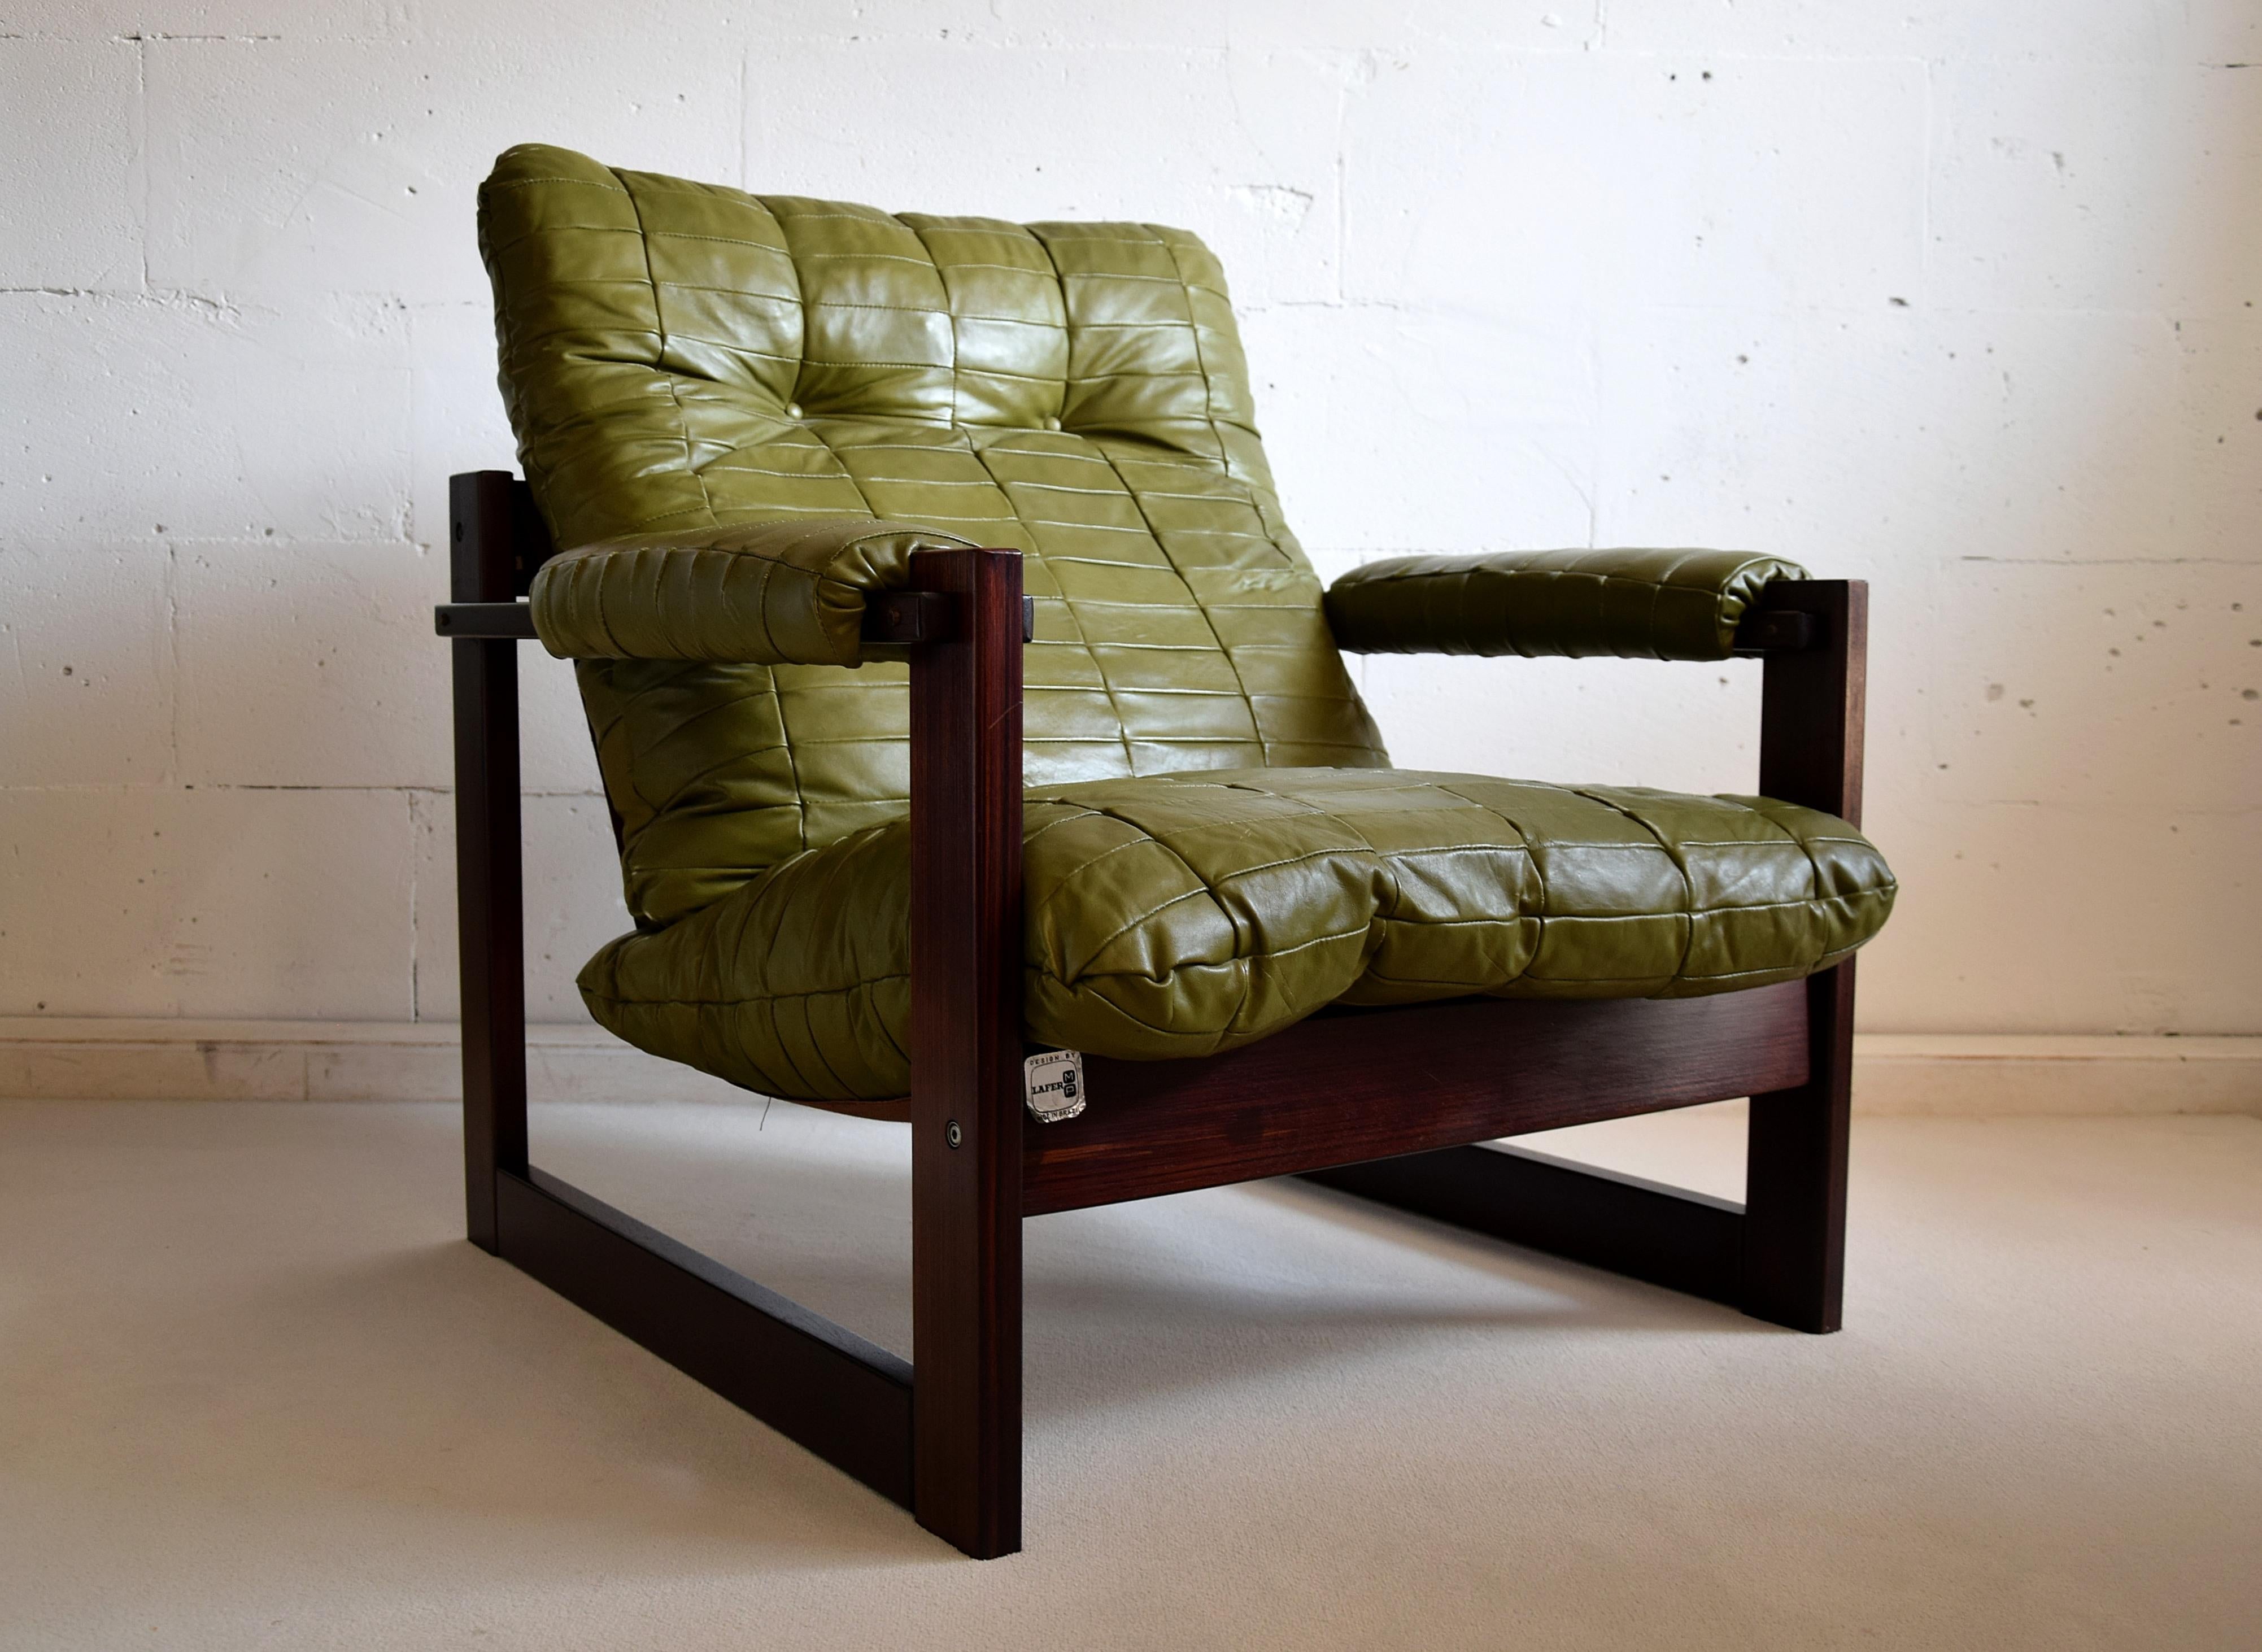 Stylish olive green Mid-Century Modern lounge chair designed and produced by Percival Lafer in Sào Paulo Brazil. The Brazilian mahogany structure is in good condition and the chair still has its original Olive green leather upholstery. This chair